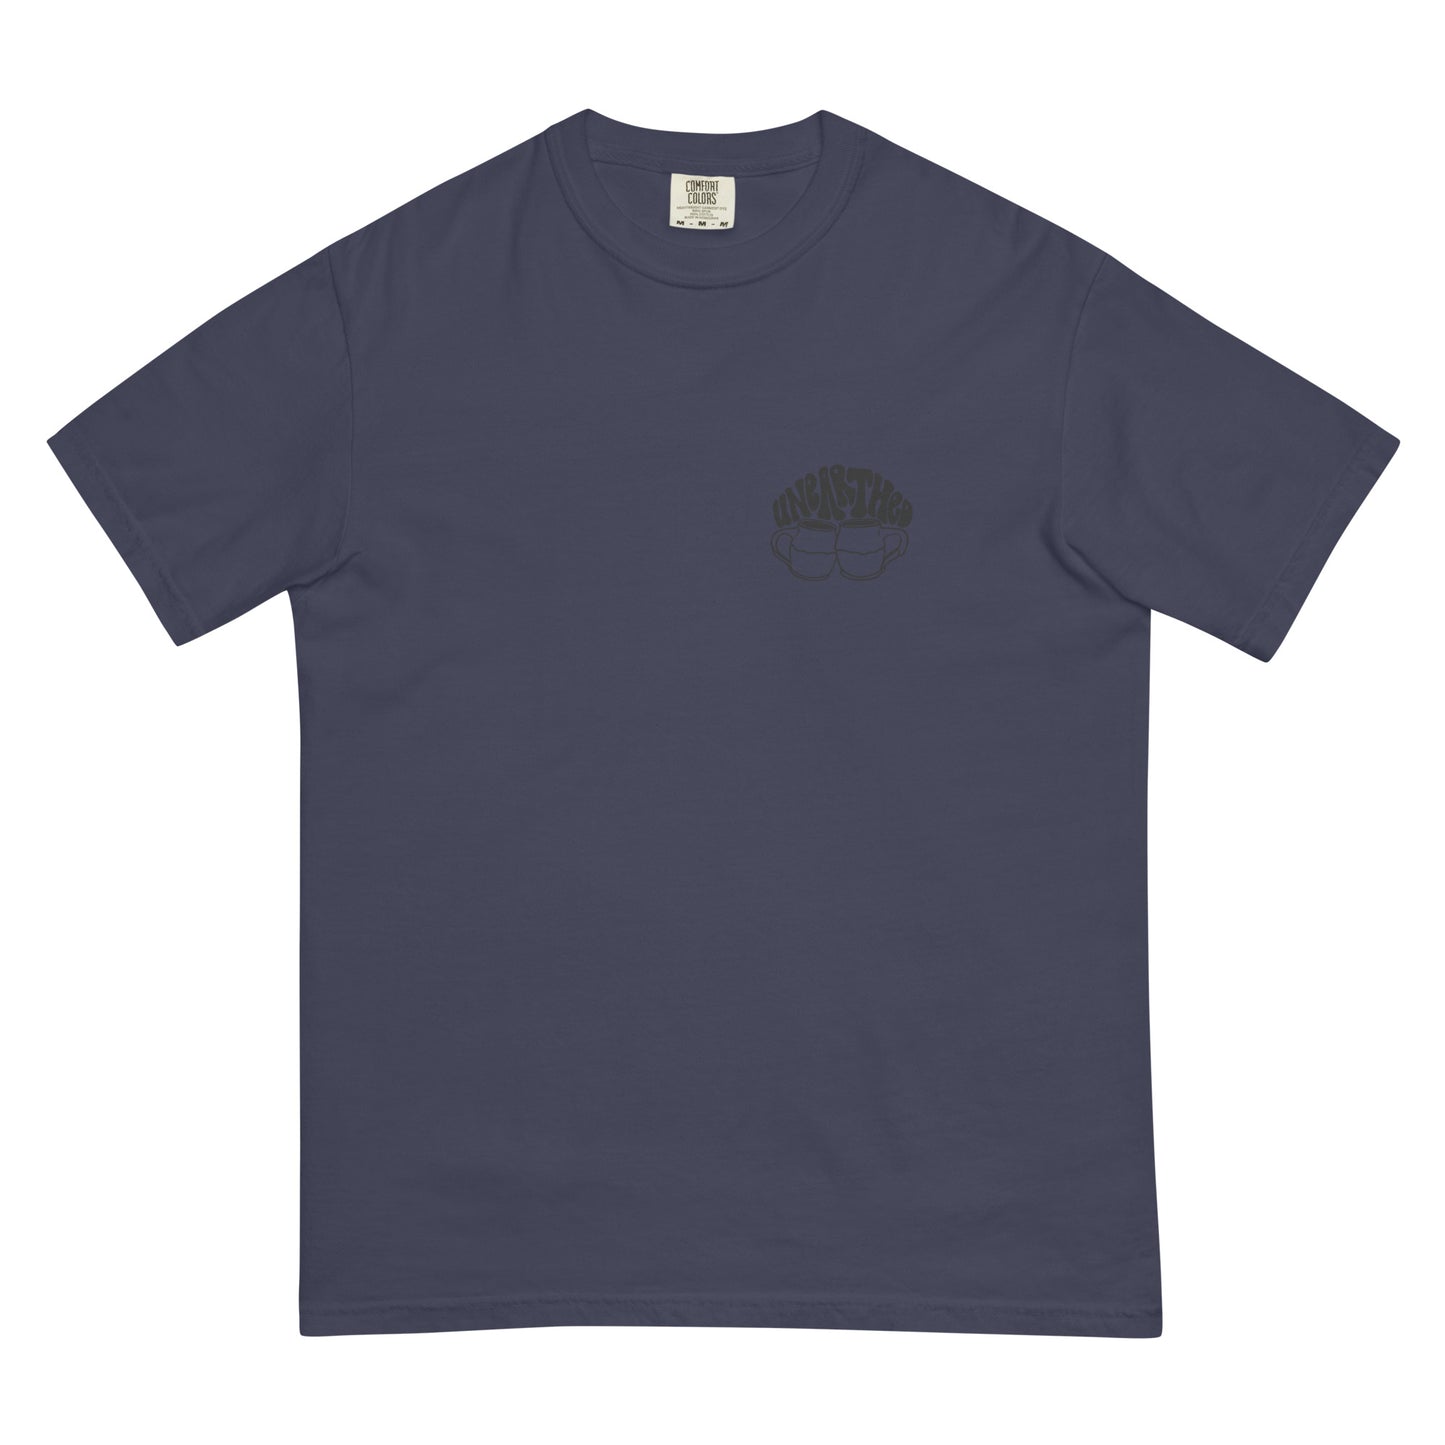 unearthed coffee cheers garment-dyed heavyweight t-shirt